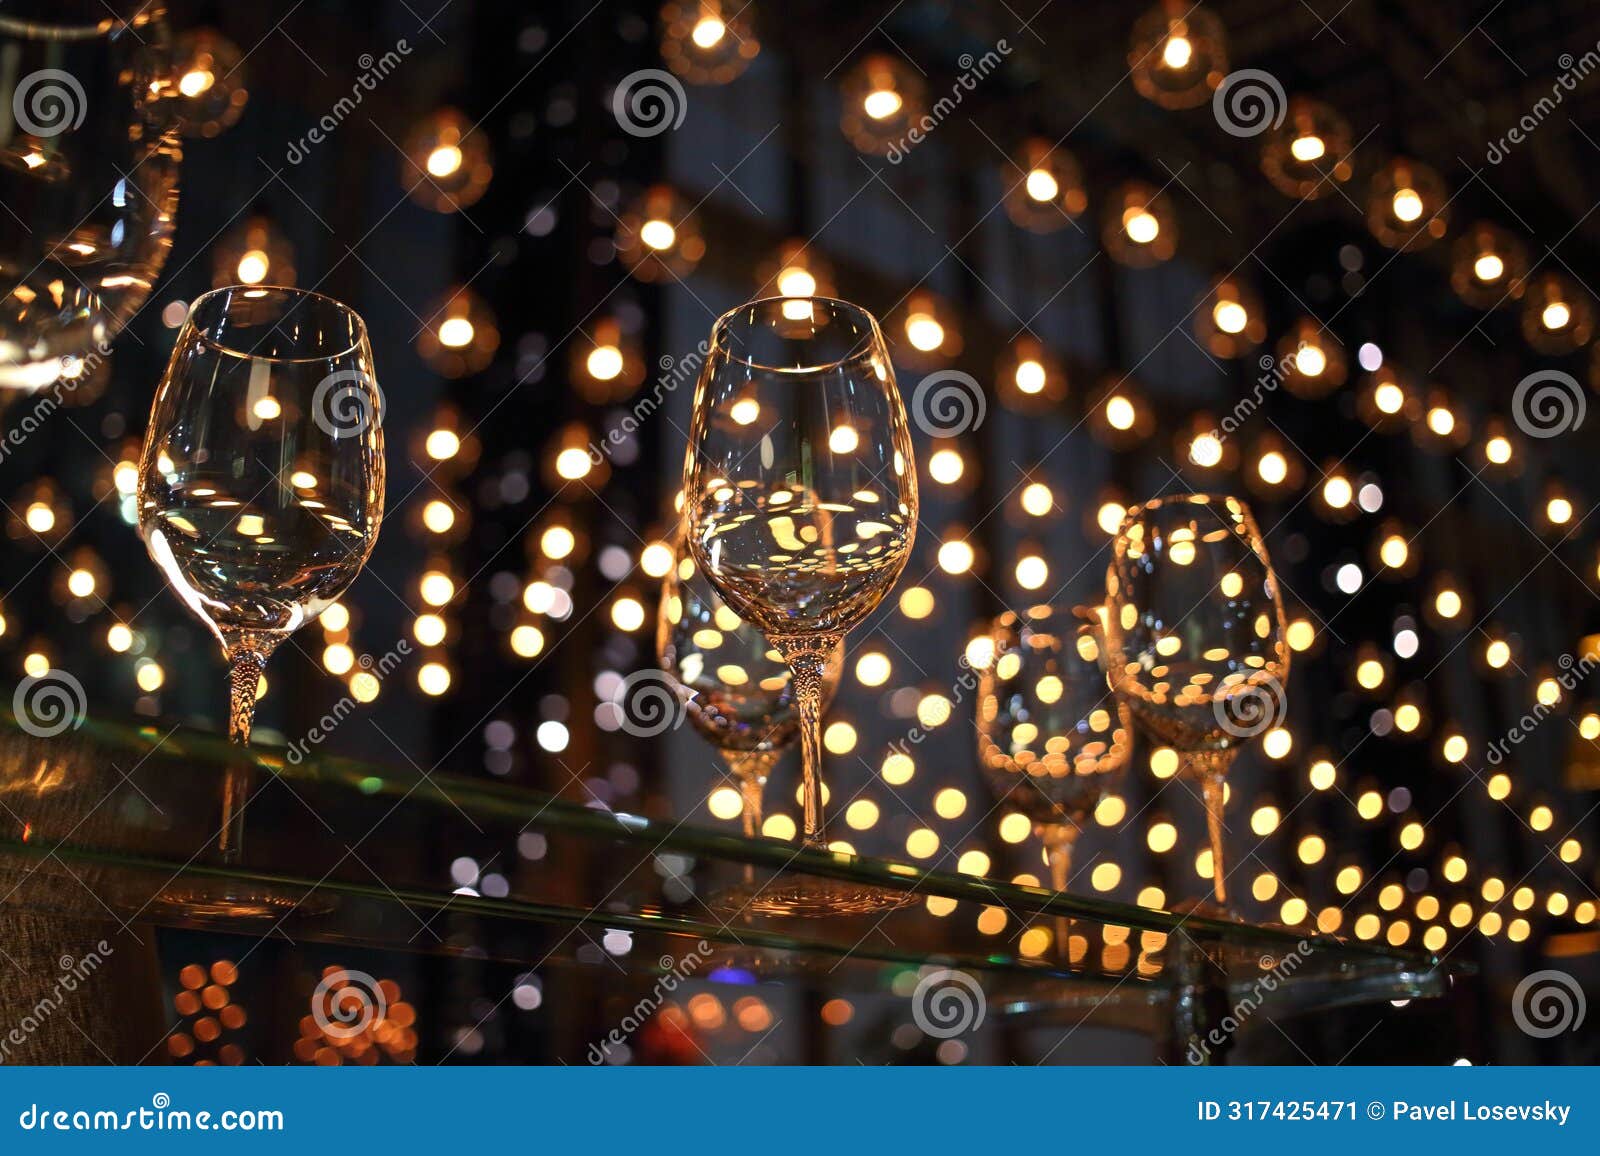 wine glasses on a glass table illuminated lots of